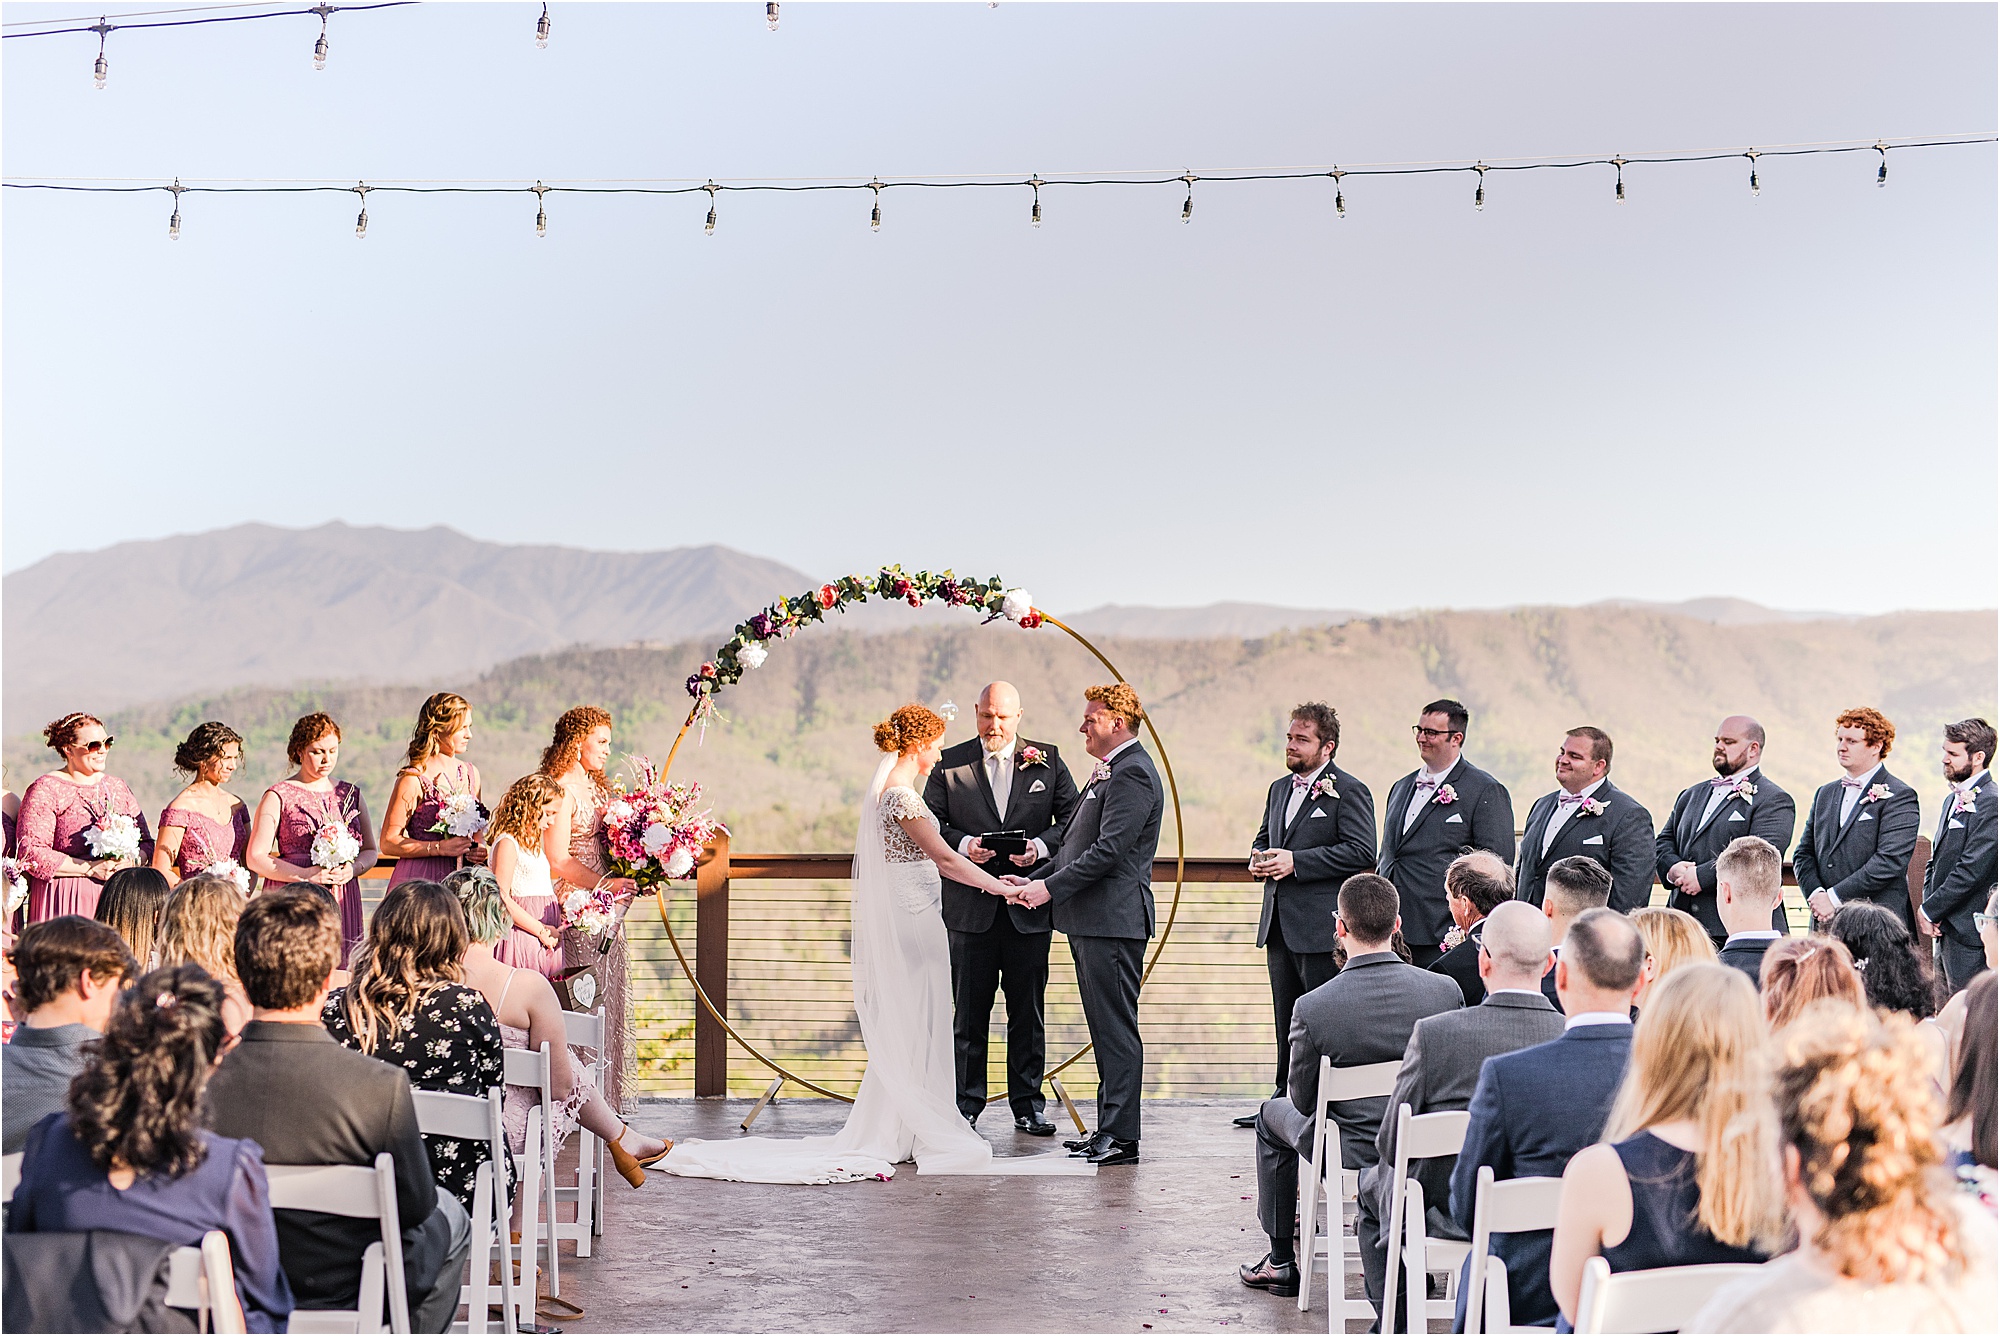 Fun, Vibrant, Eclectic Wedding in the Mountains